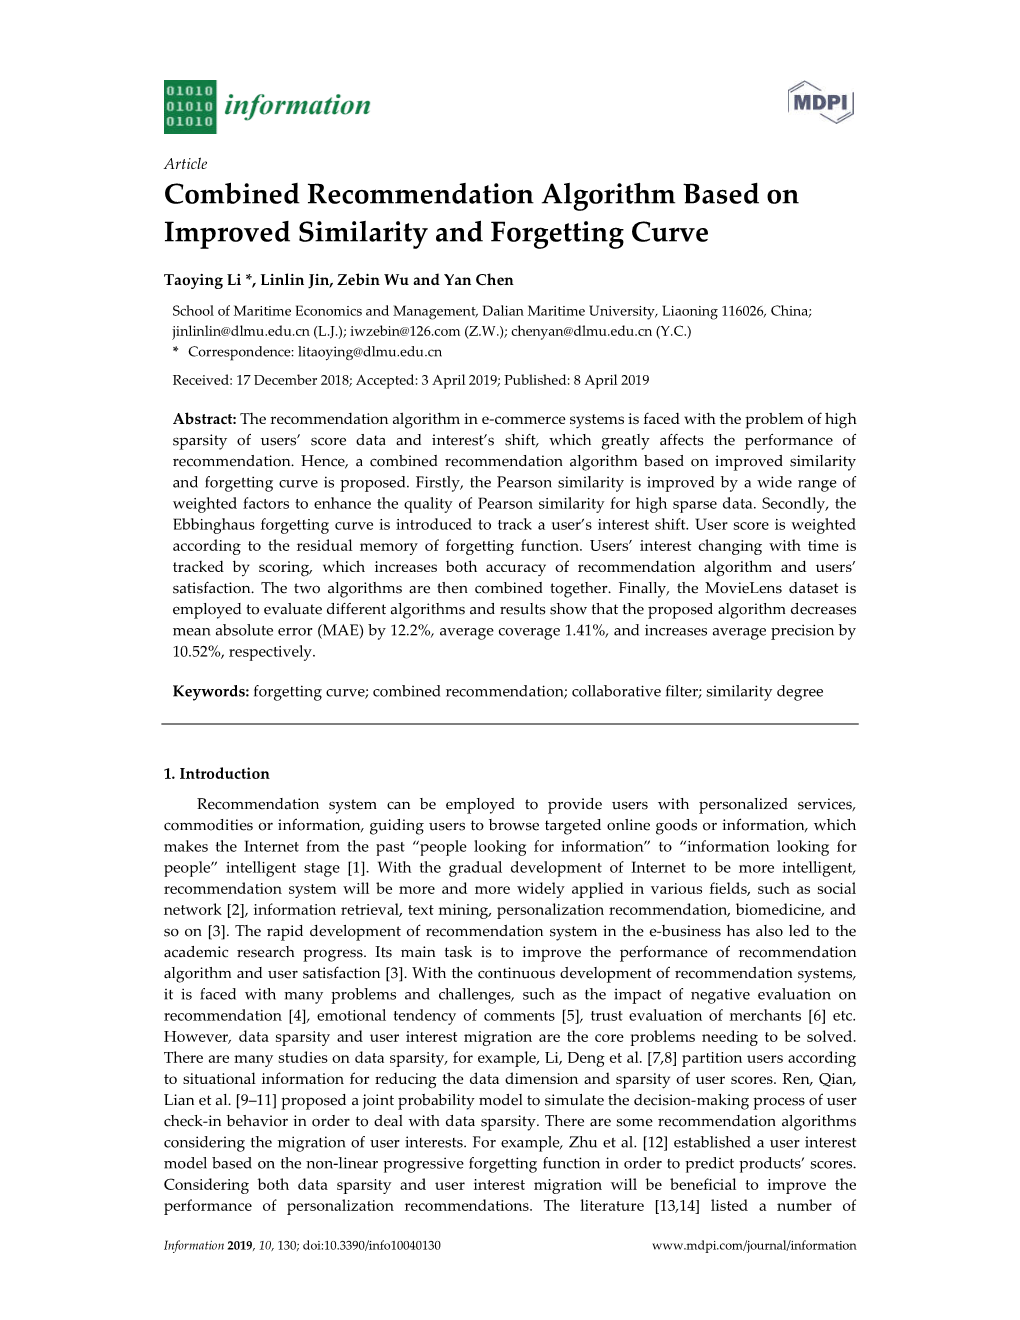 Combined Recommendation Algorithm Based on Improved Similarity and Forgetting Curve